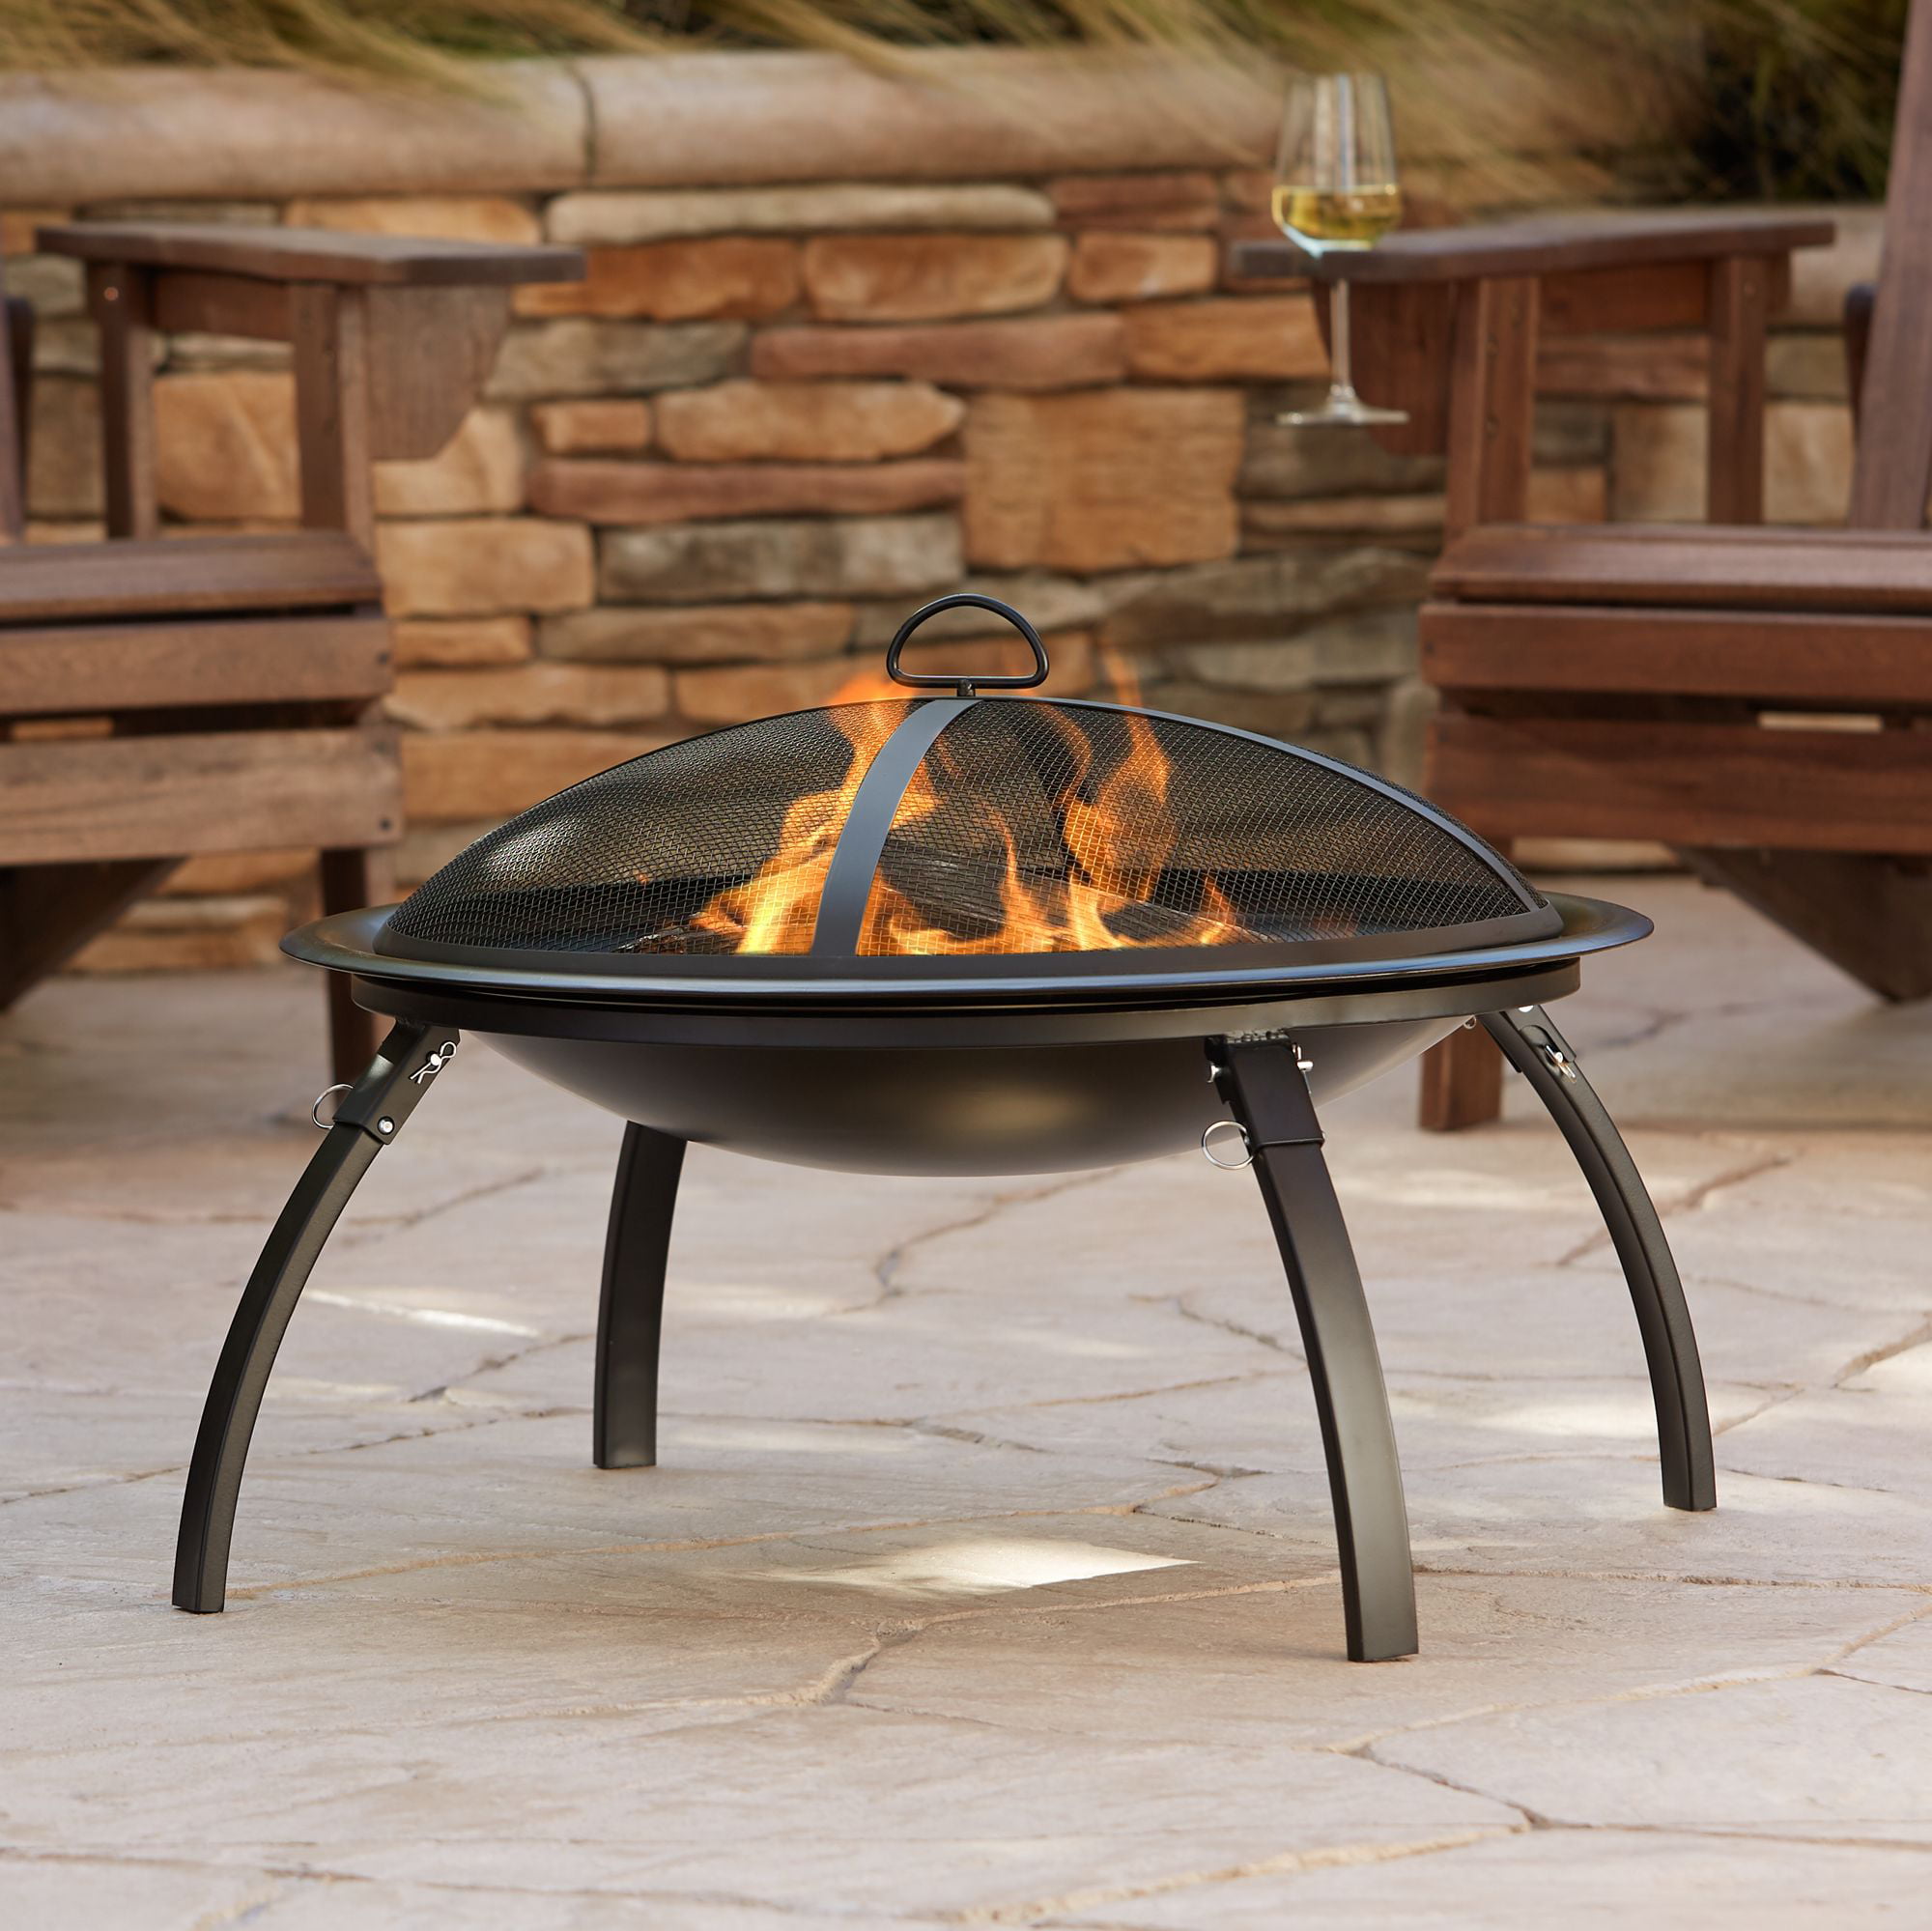 Wood-Burning Fire Pit 35-in Round Bowl Black Steel Spark Screen w/Cover New 